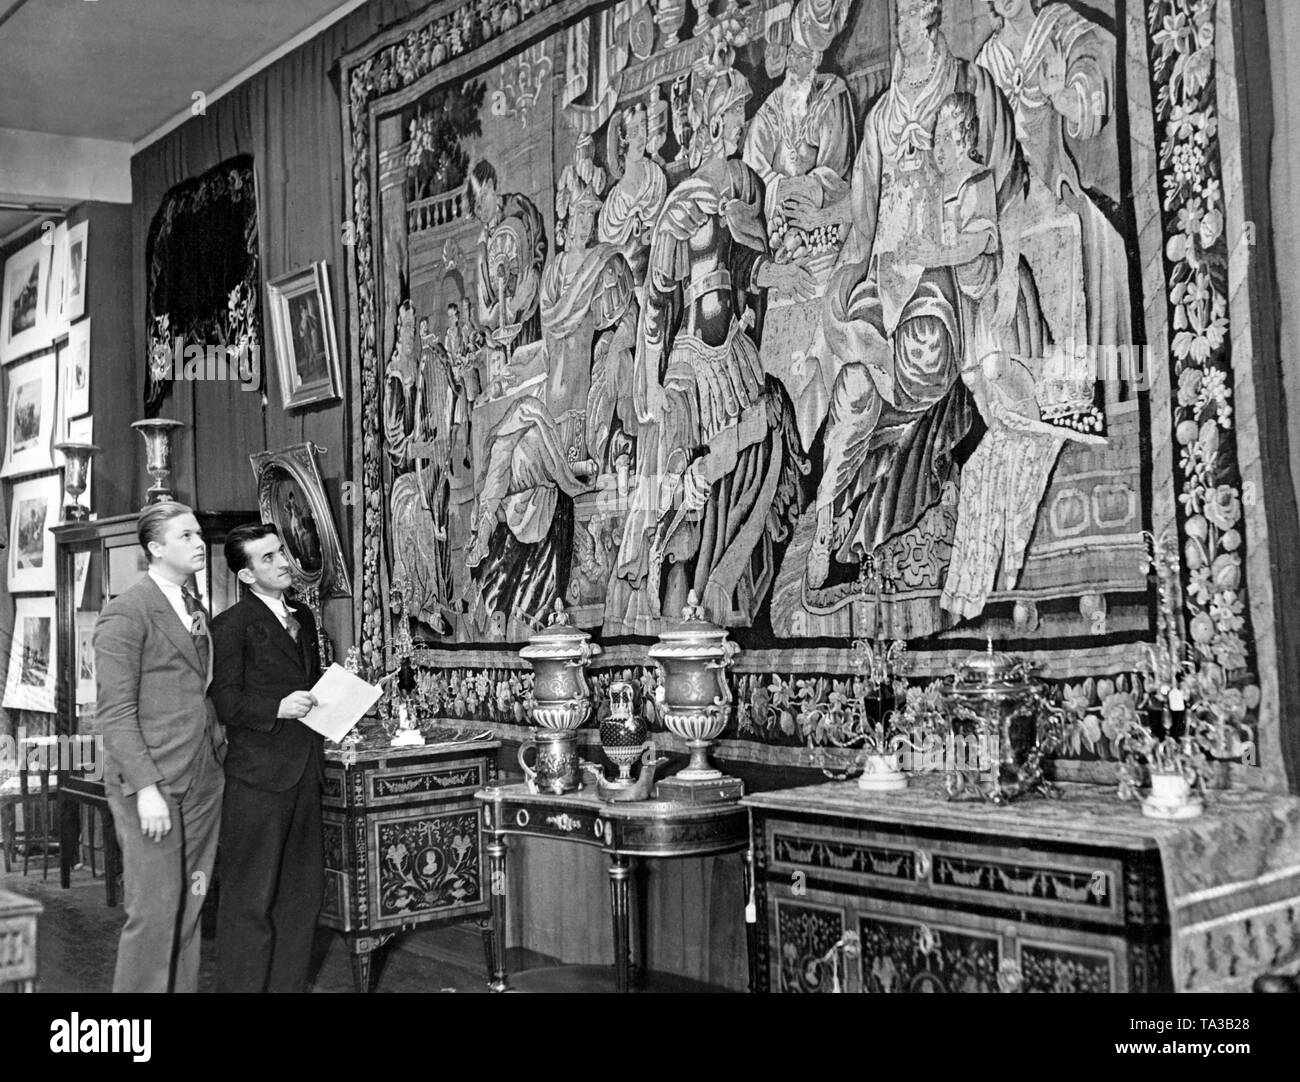 A tapestry owned by Peter the Great is auctioned in New York City. The Soviet government had to sell art treasures from the tsarist period to obtain foreign currency repeatedly. Stock Photo